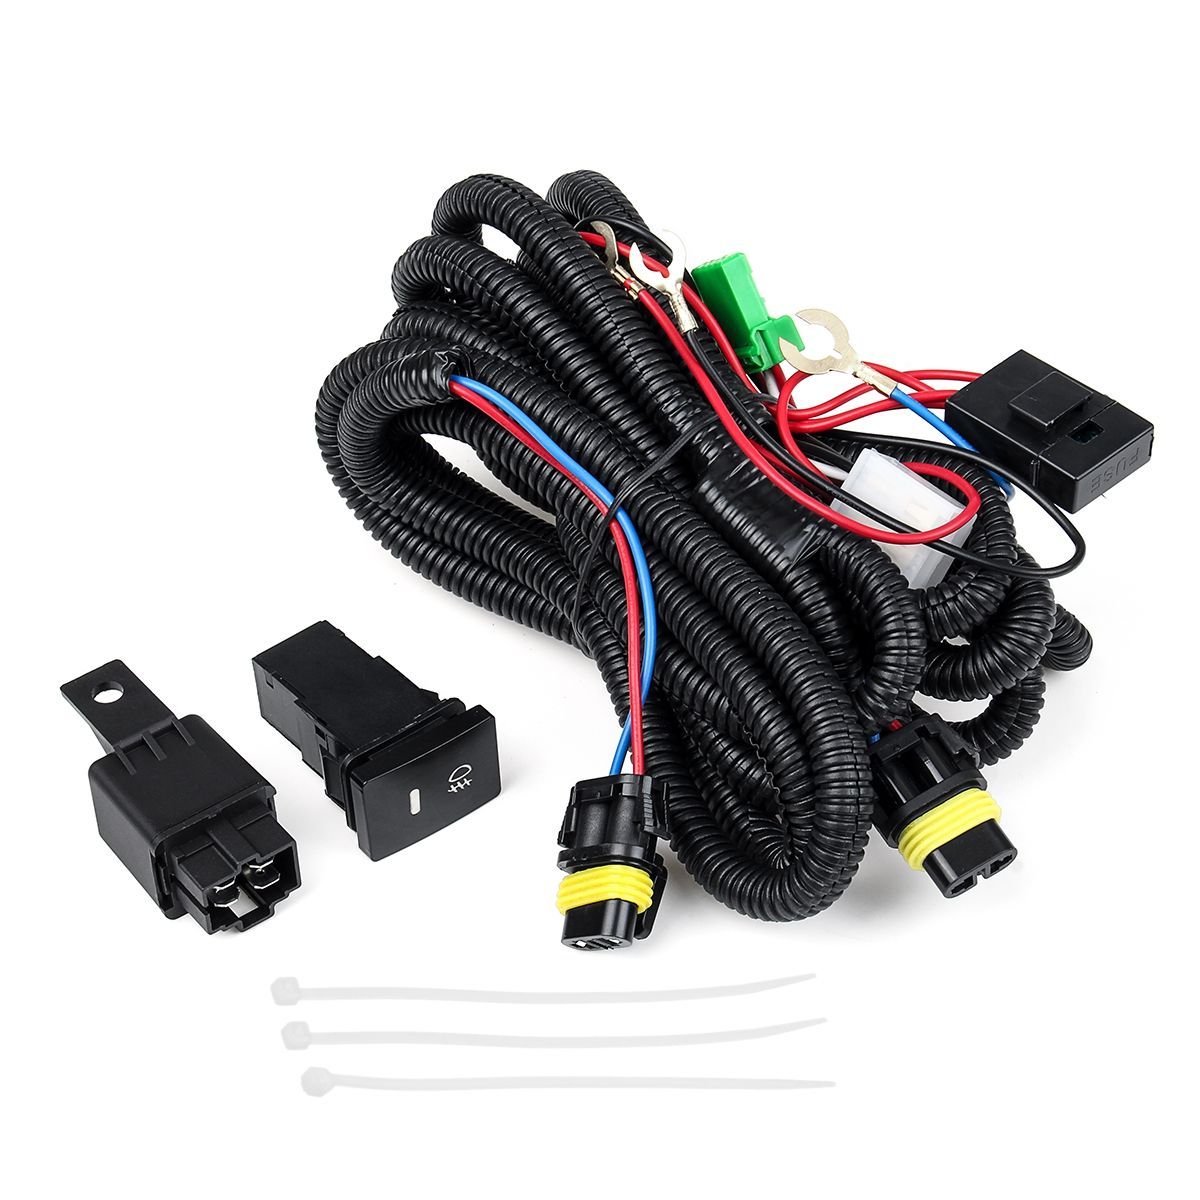 2Pcs-Car-Front-Bumper-Fog-Lights-Lamps-H11-Bulb-With-Switch-Relay-Cover-Wiring-Harness-Kit-For-Toyot-1674213